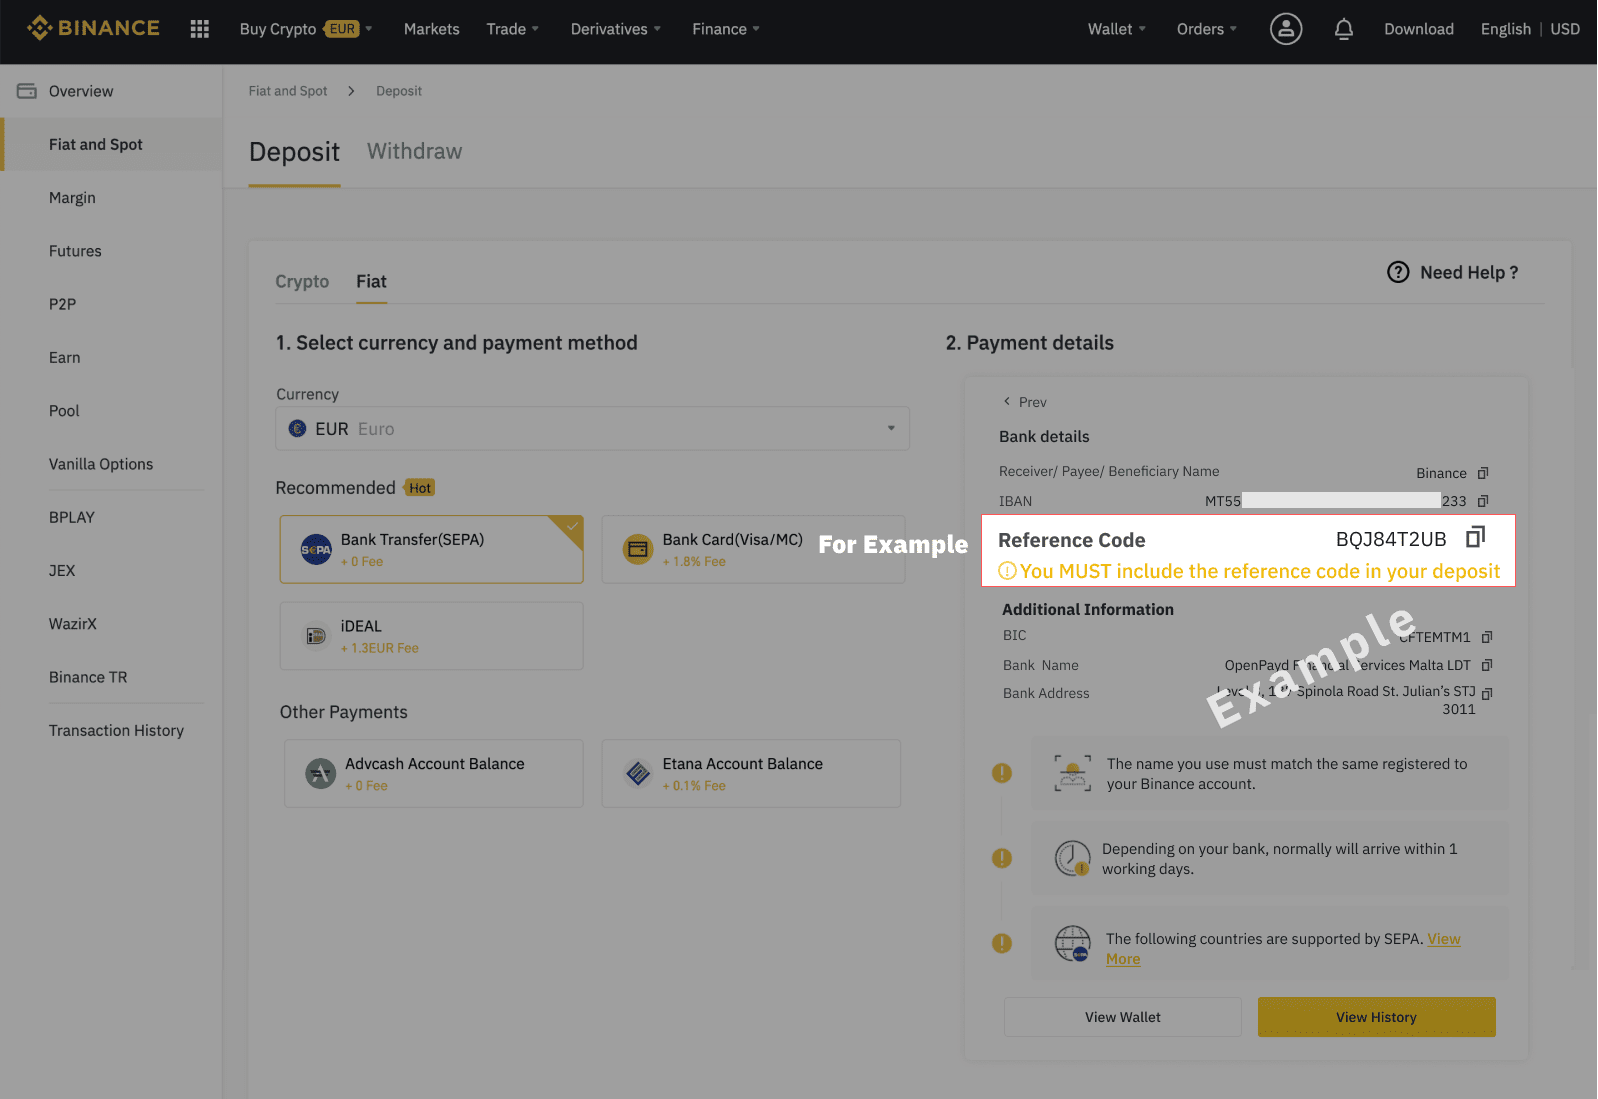 How to Deposit to Binance with French Bank: Caisse d’Epargne